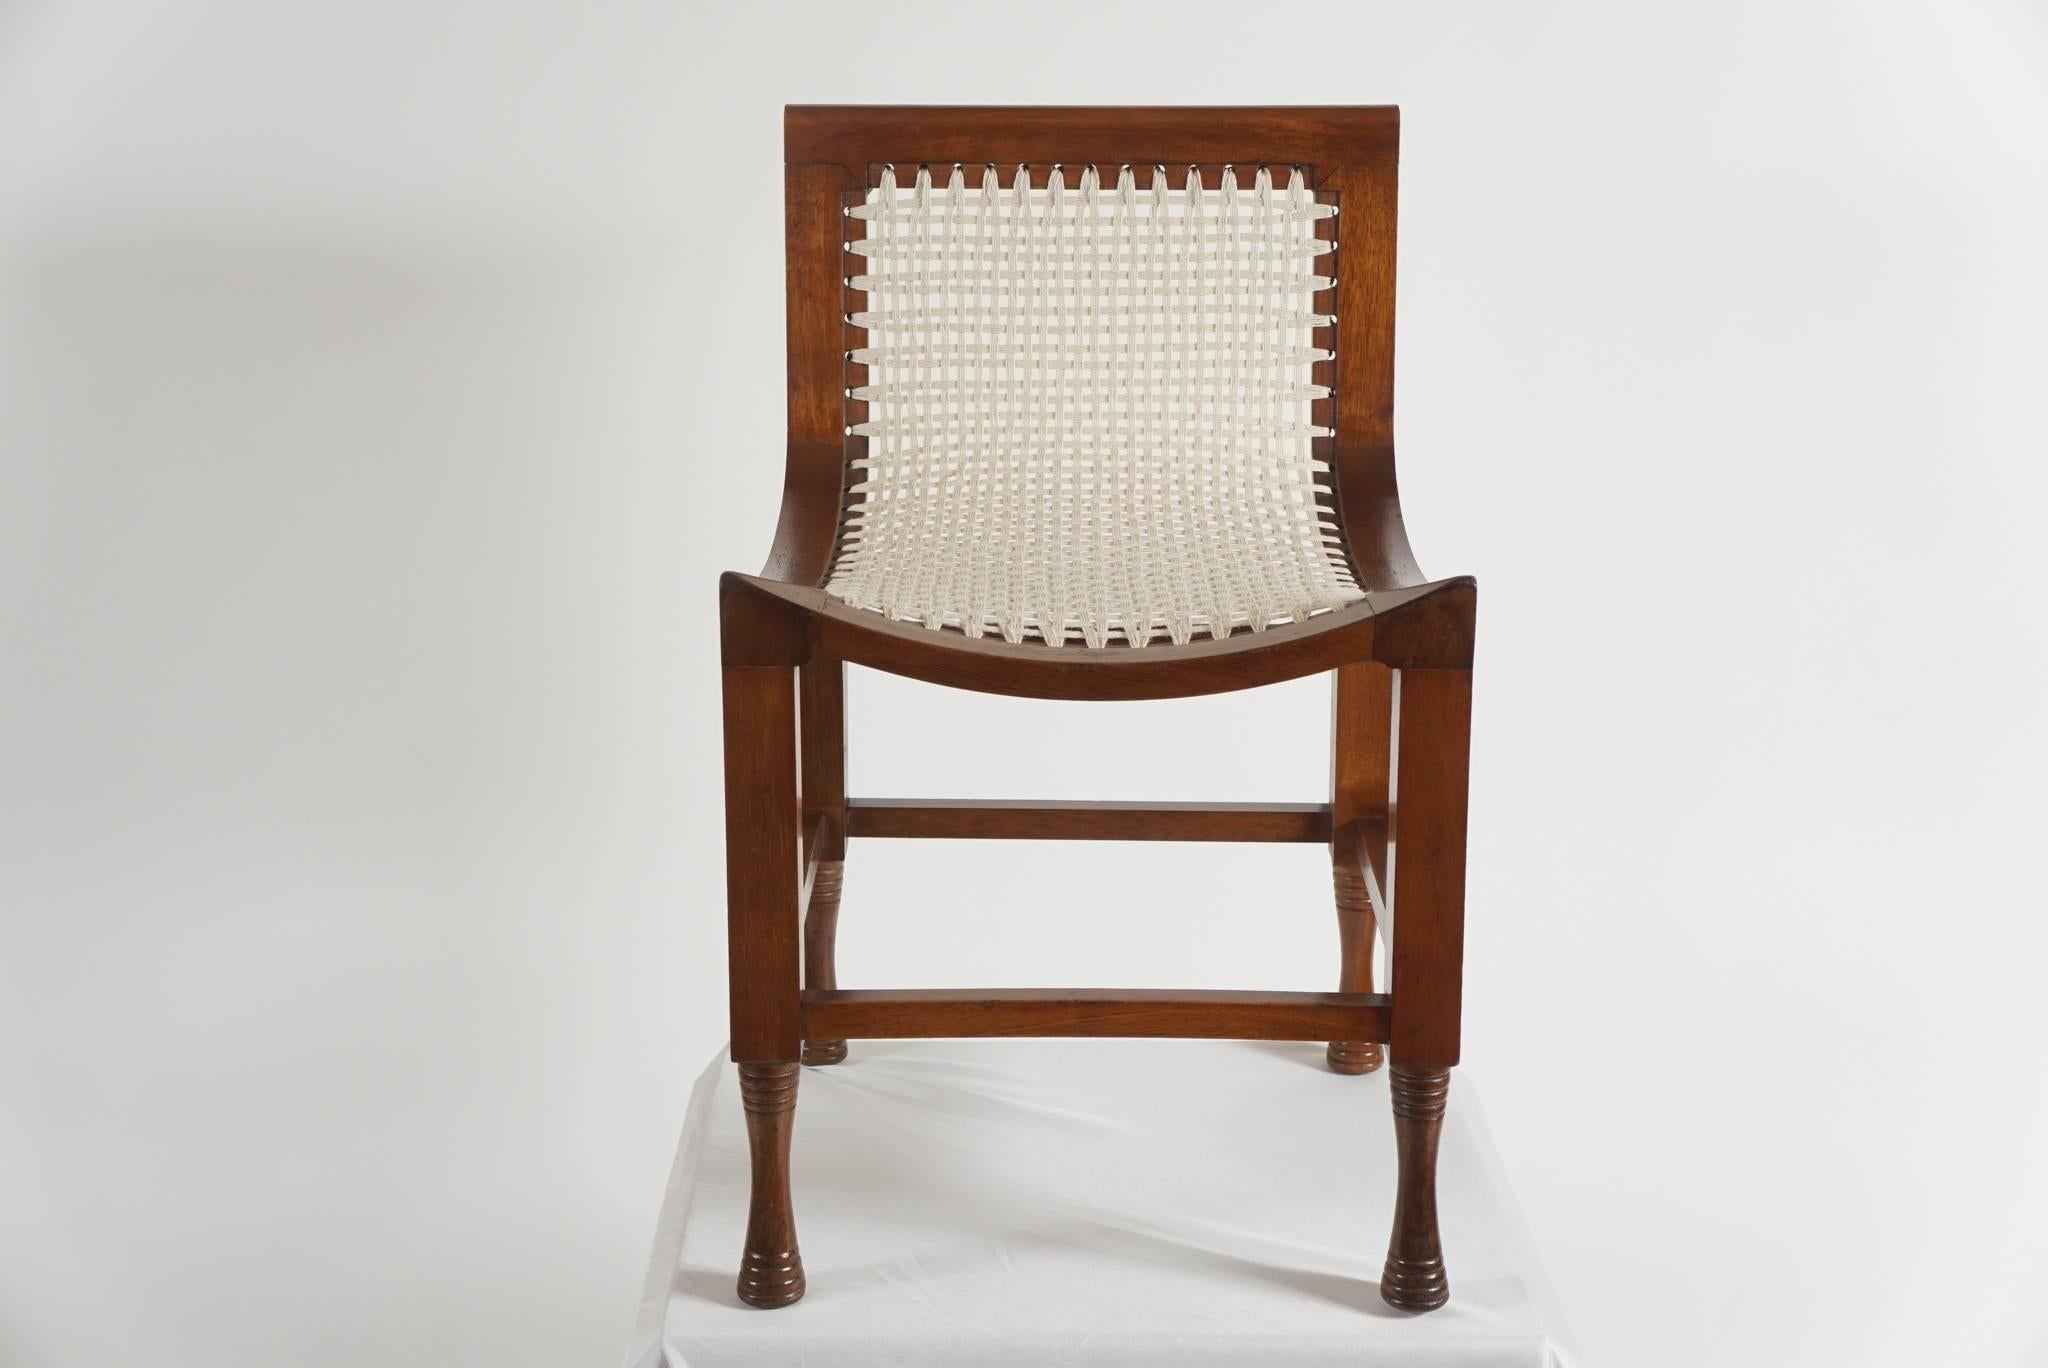 Wonderful, early 20th century, Liberty & Co. 'Thebes' Egyptian style child's chair or low-backed stool having carved mahogany frame with woven hemp twine seat.